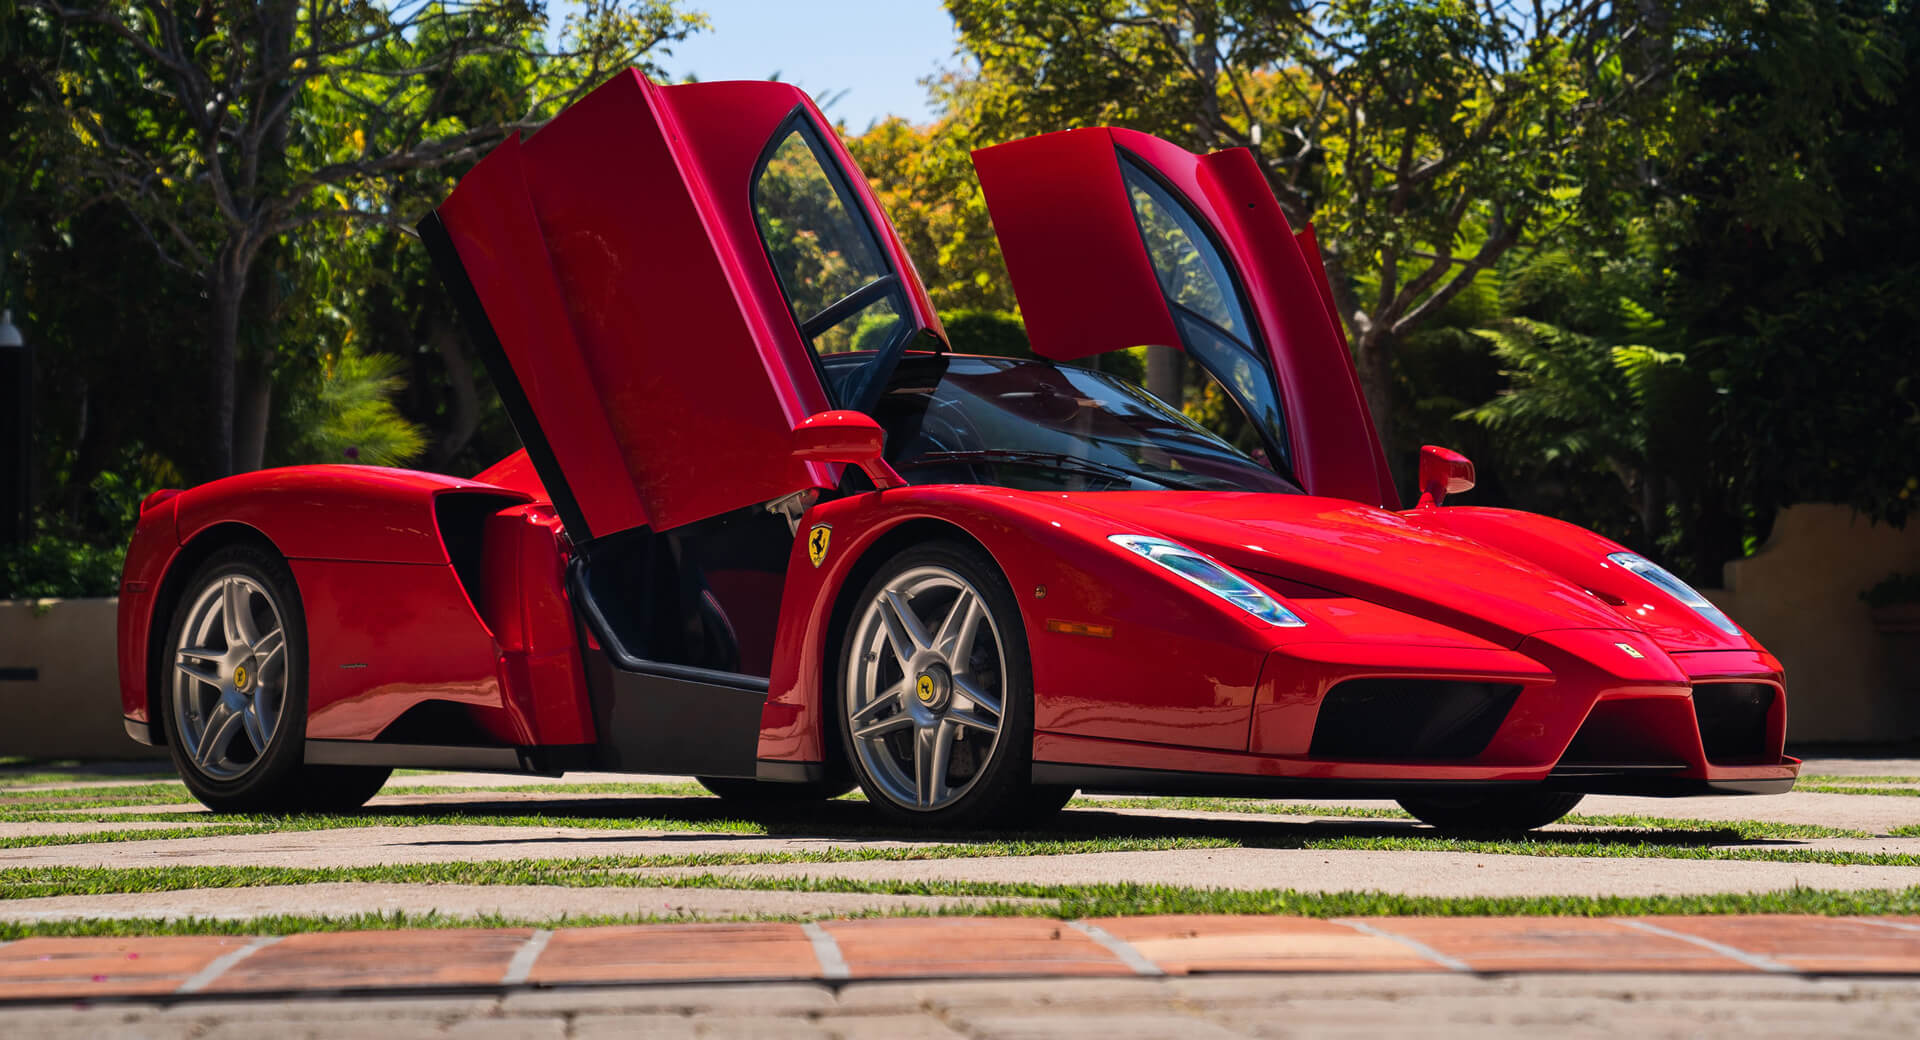 Ferrari Enzo Sets Record For The Most Expensive Car Sold In OnlineOnly